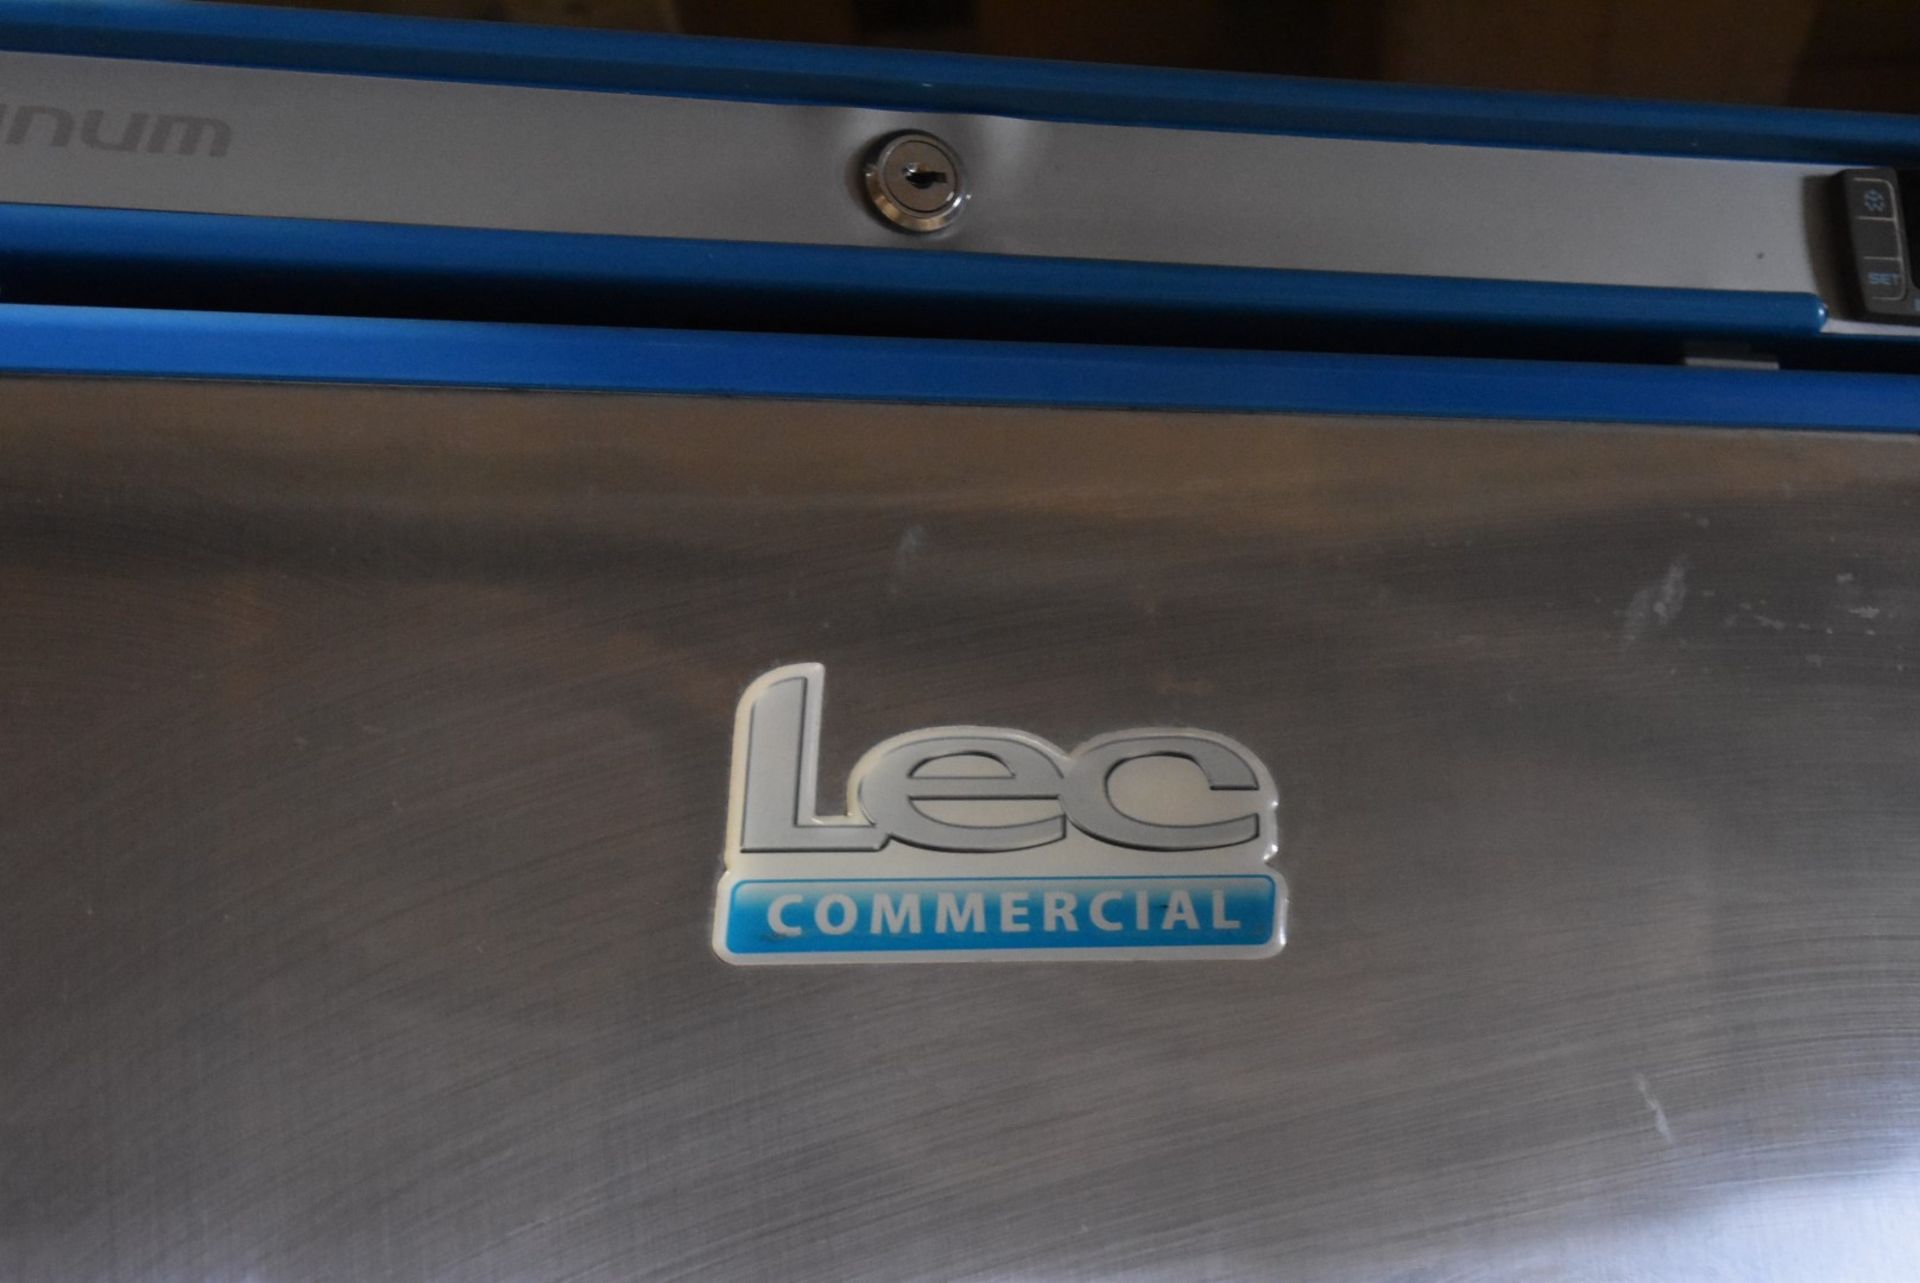 1 x Lec Commercial Platinum CRS600ST 600 Ltr Upright Fridge With Stainless Steel Finish - CL232 - - Image 3 of 6